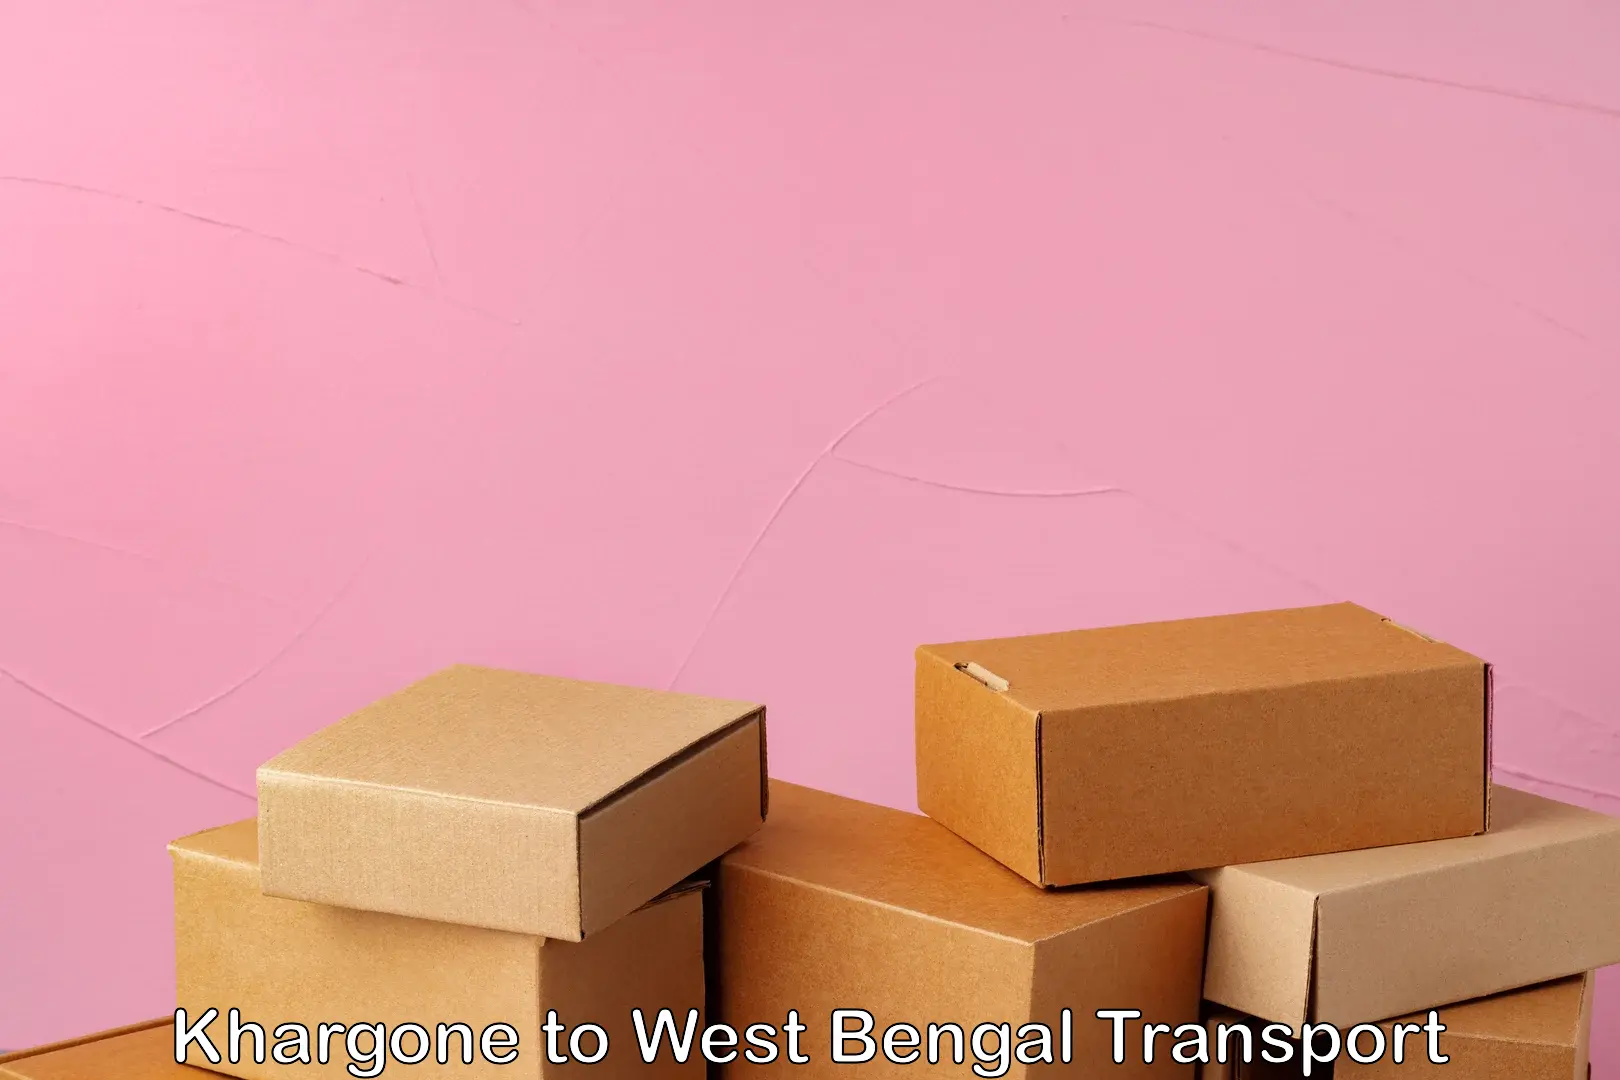 Goods delivery service Khargone to West Bengal